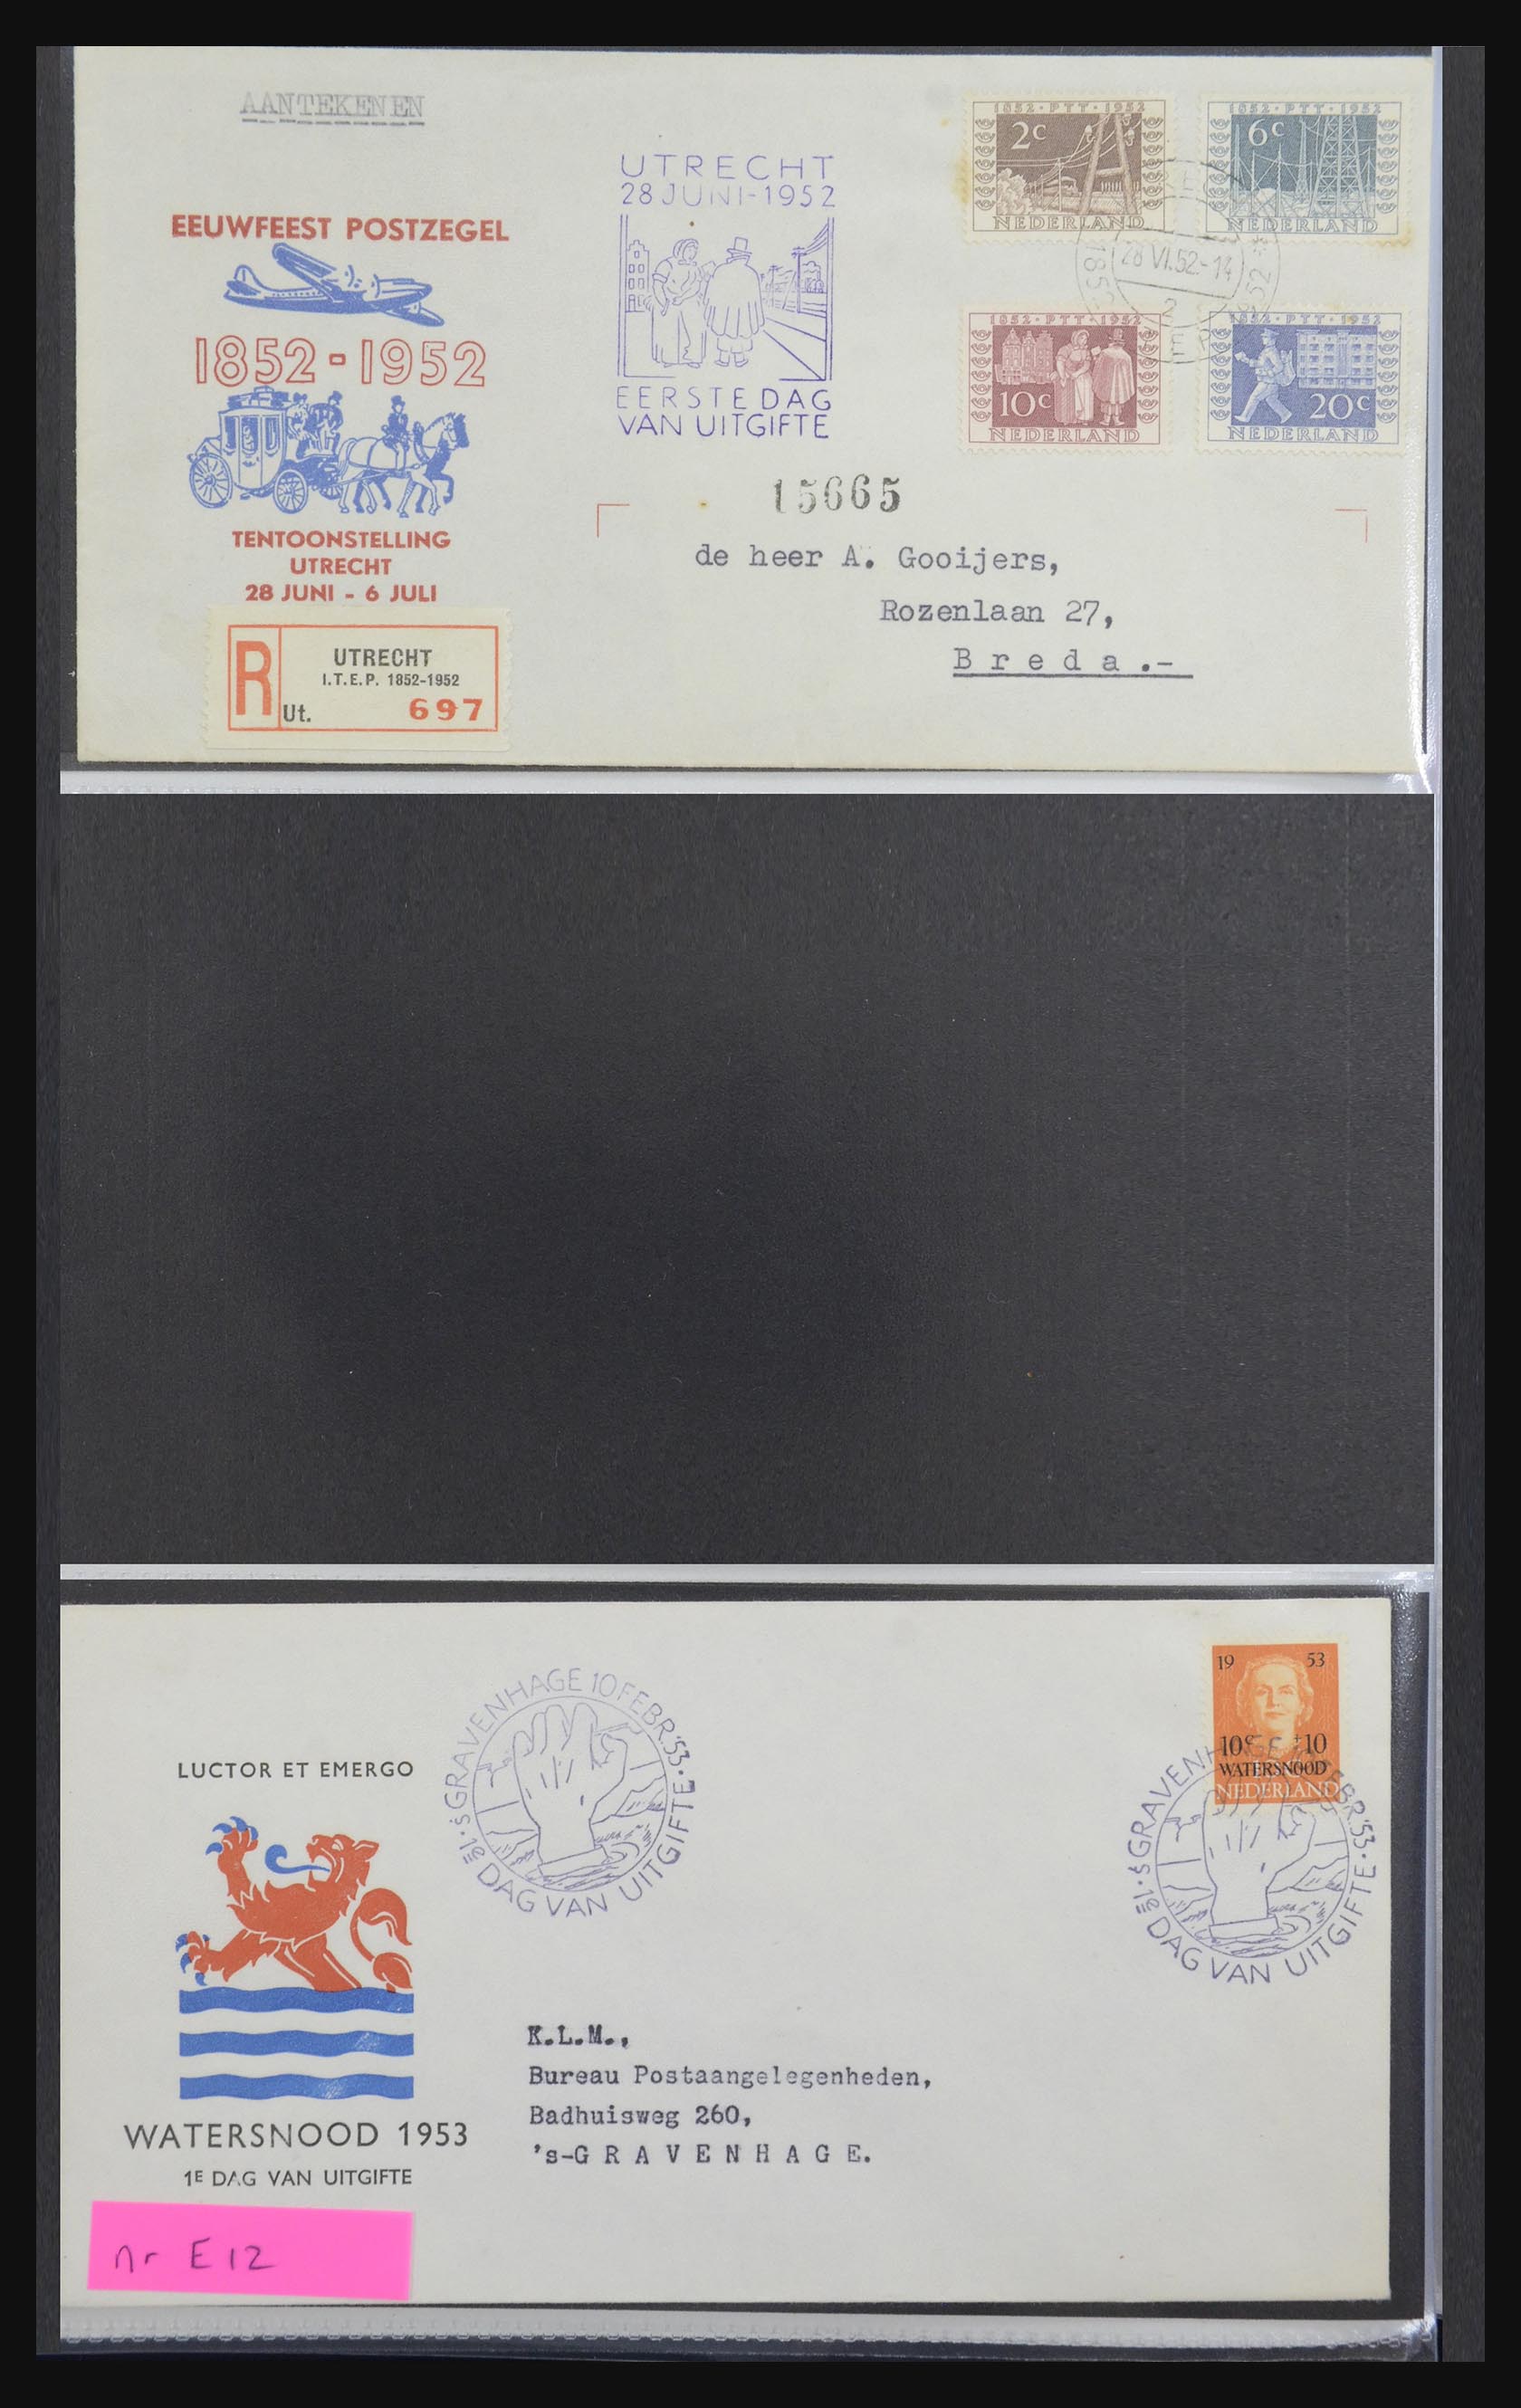 32170 001 - 32170 Netherlands FDC's 1953-2004.